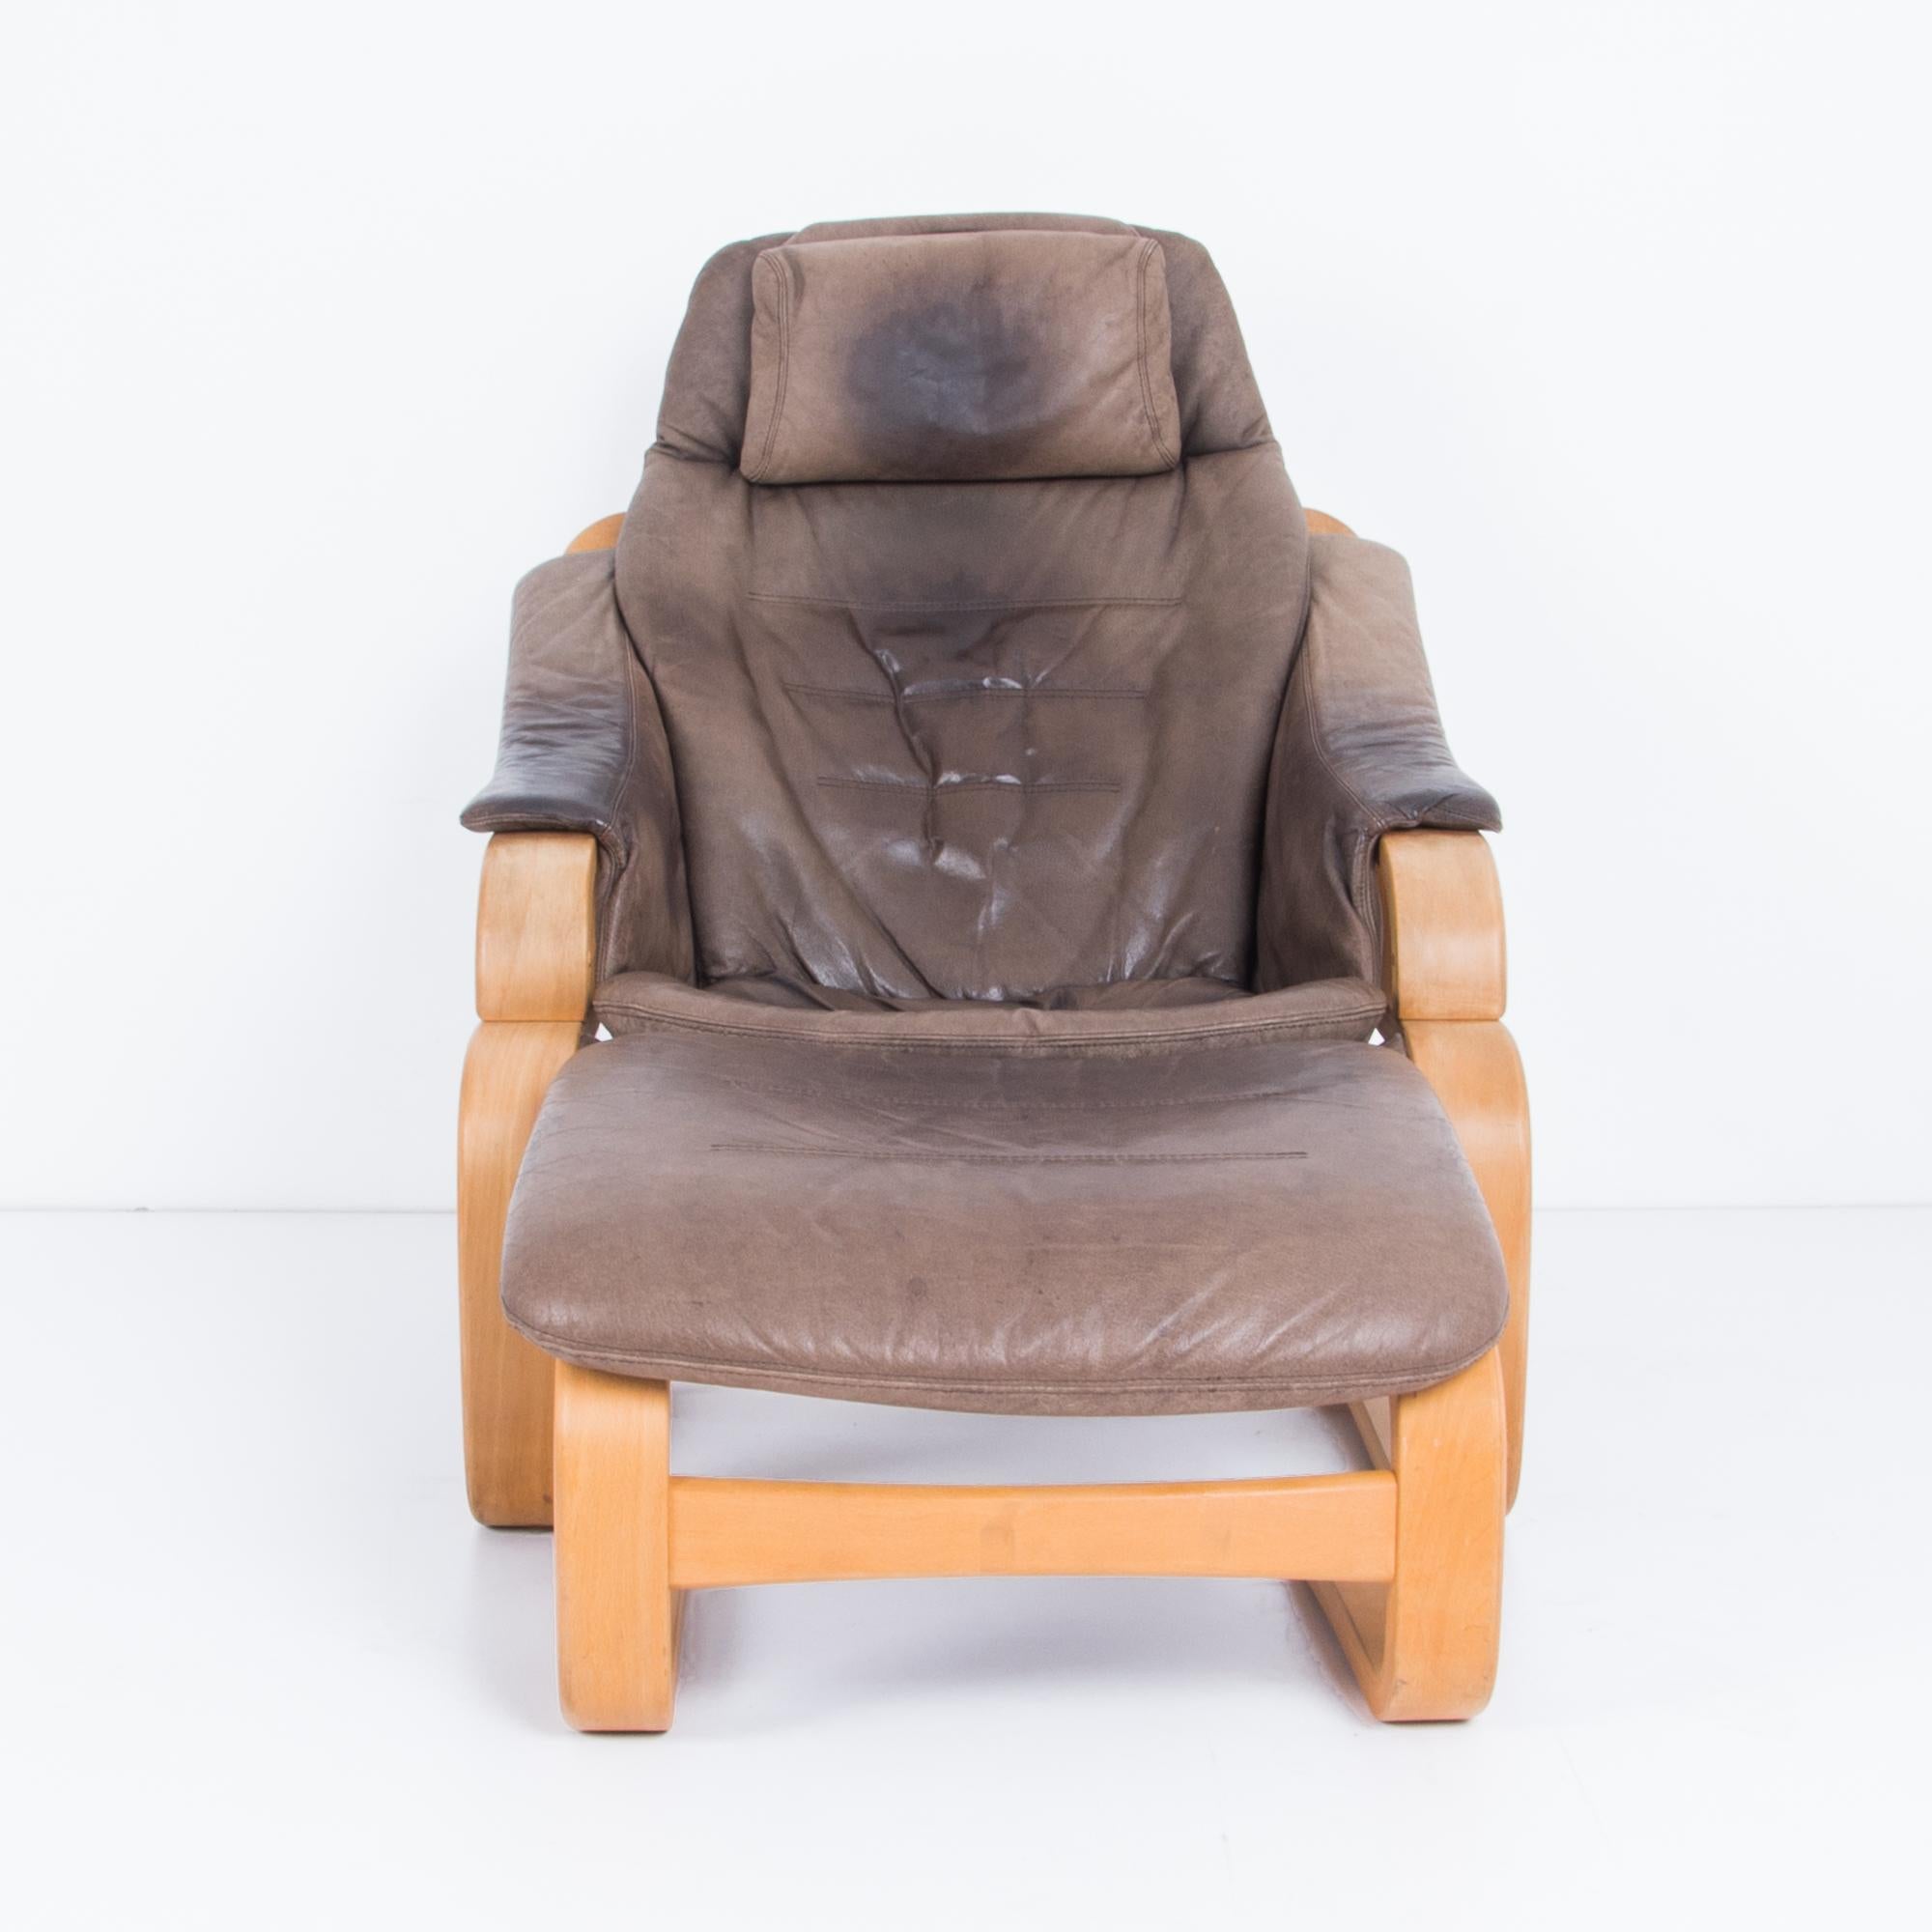 This original leather armchair and footrest by Danish manufacturer Skipper Mobler was made in the 1980s. A cantilevered bentwood frame references Scandinavian Modernism, while the gentle gradient of the grey leather softens the bright tones of the